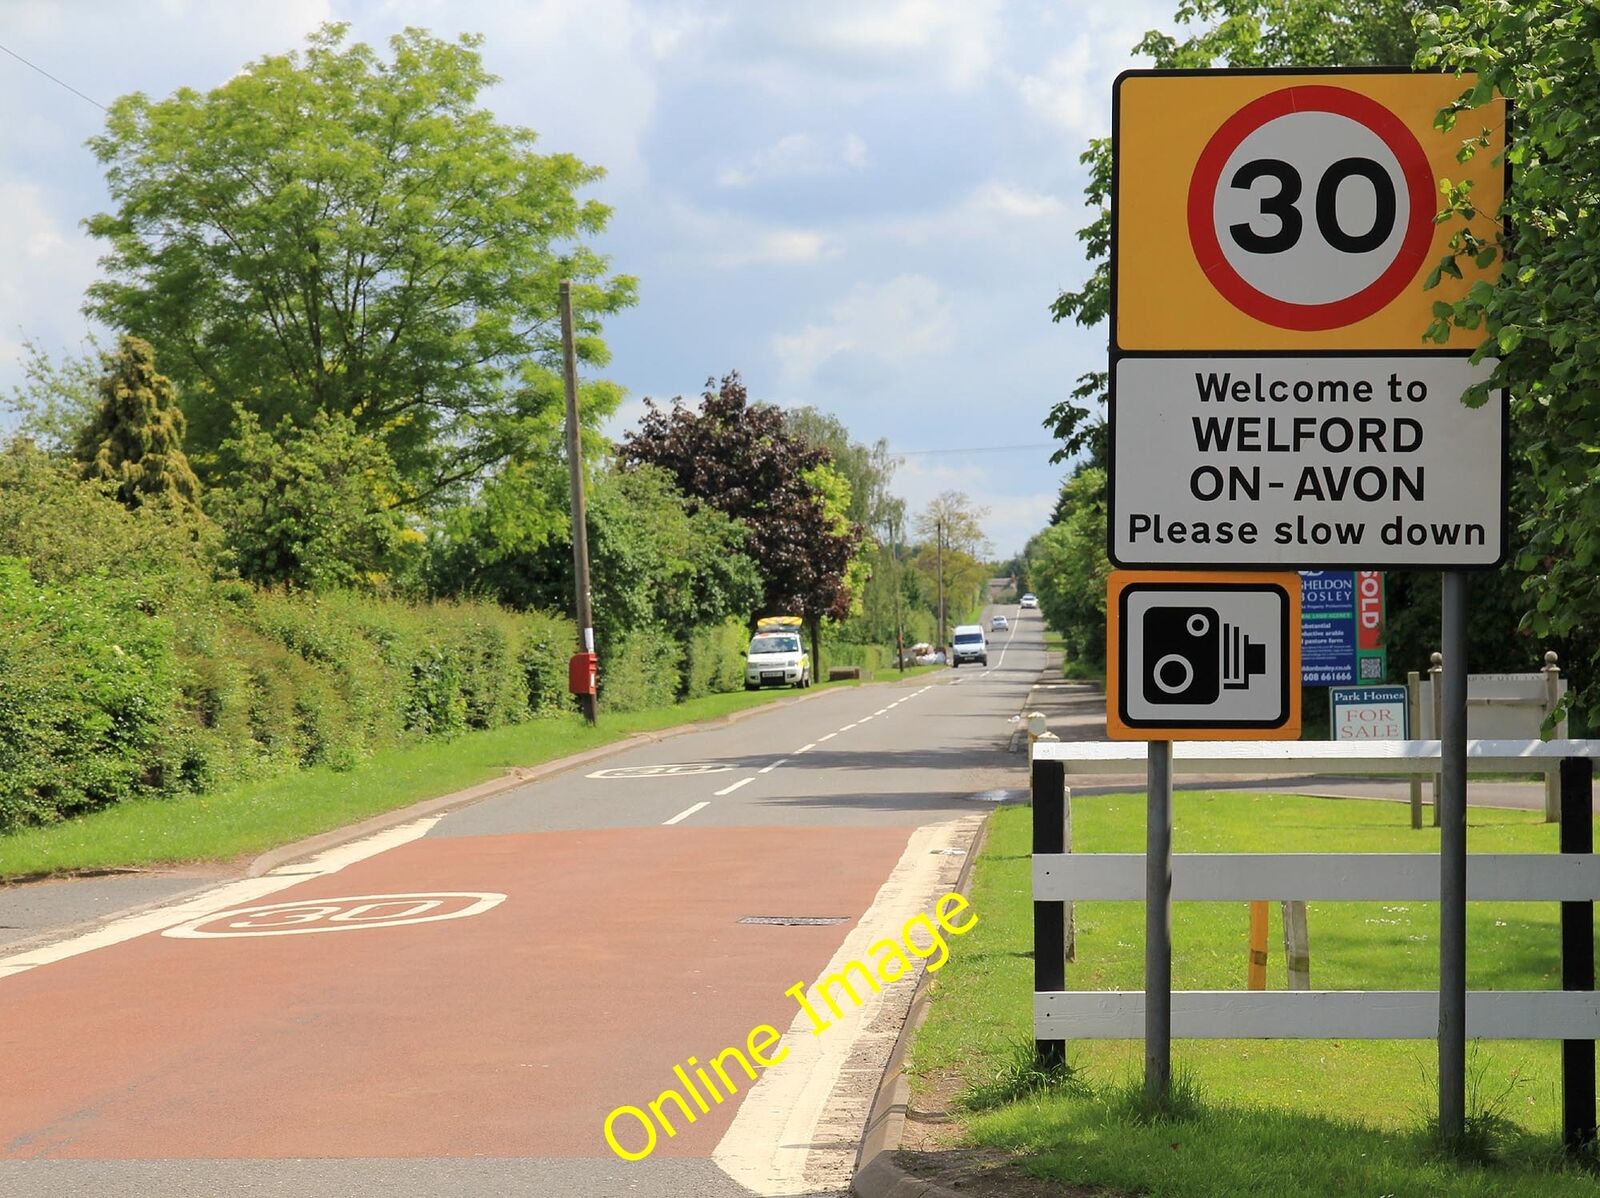 Photo 6x4 Welcome to Welford-on-Avon A welcome sign and exhortation to sl c2012